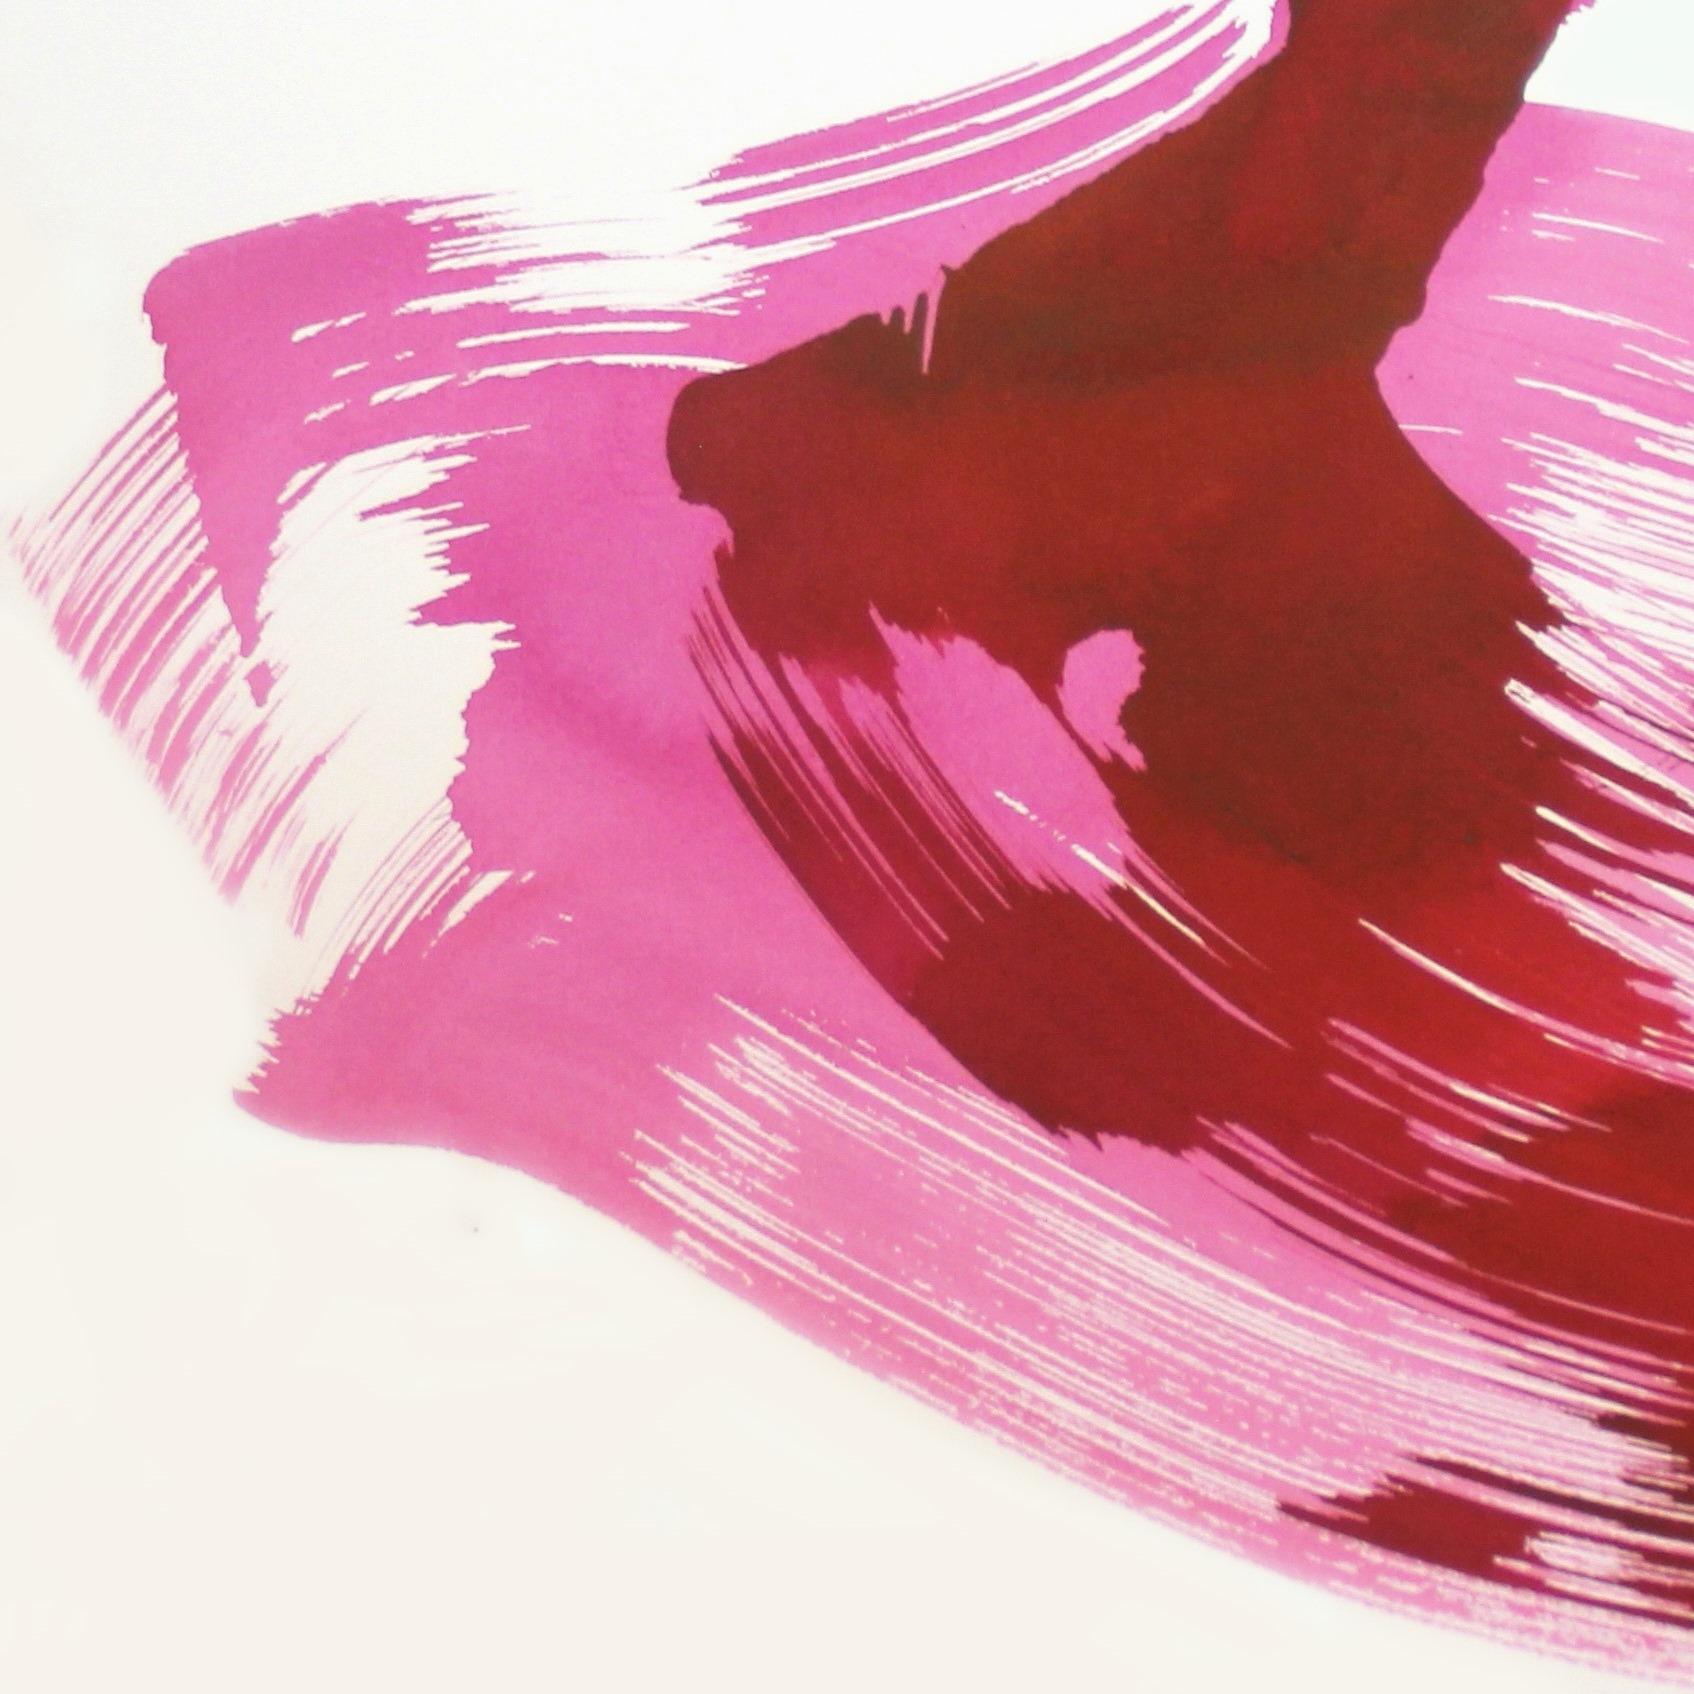 The Violet Dress 14 - Pink and Red Minimalist Figurative Ink Painting - Abstract Mixed Media Art by Bettina Mauel